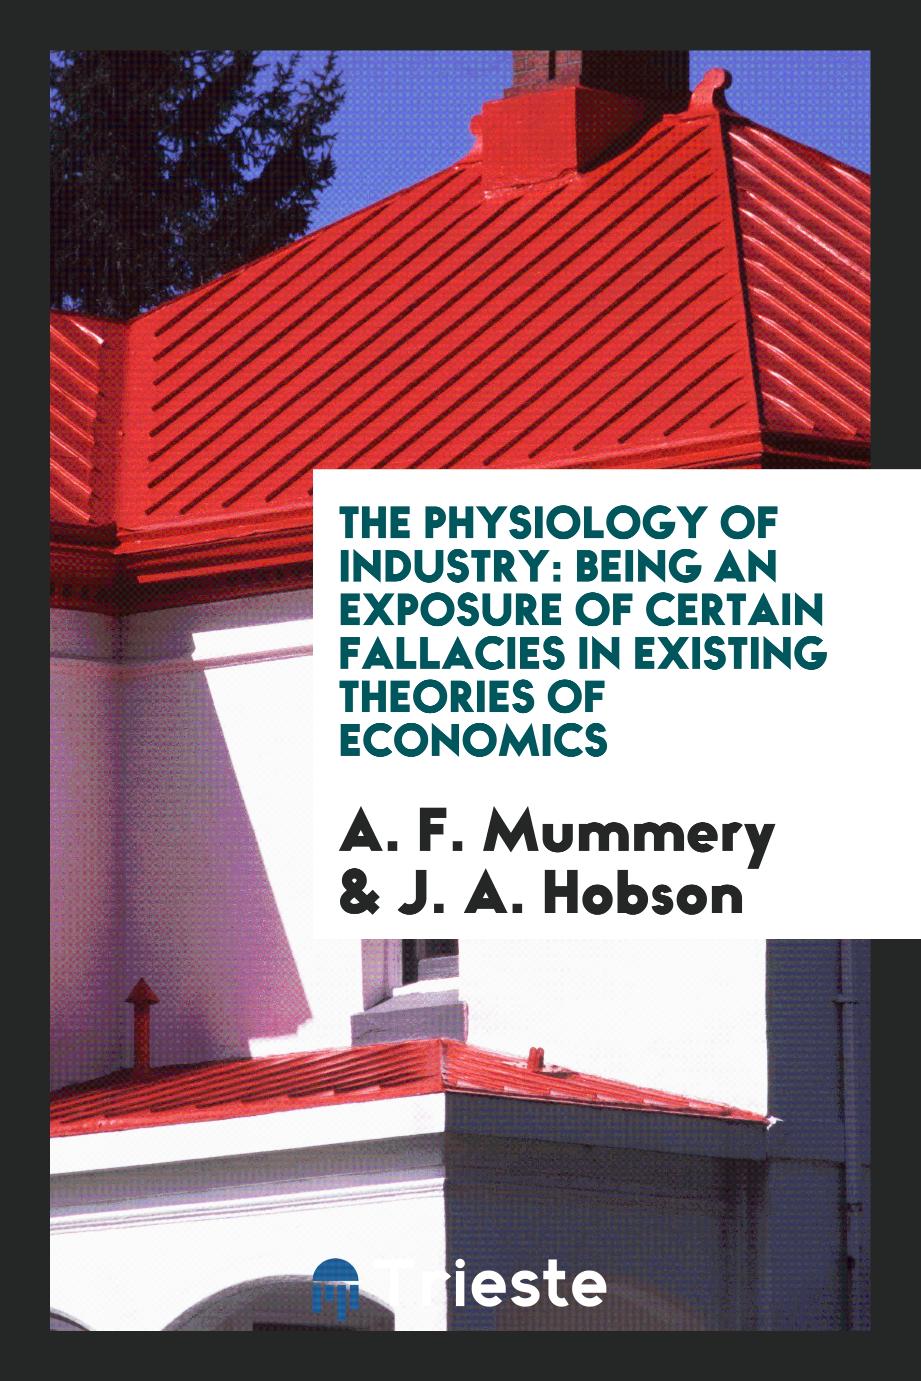 The physiology of industry: being an exposure of certain fallacies in existing theories of economics